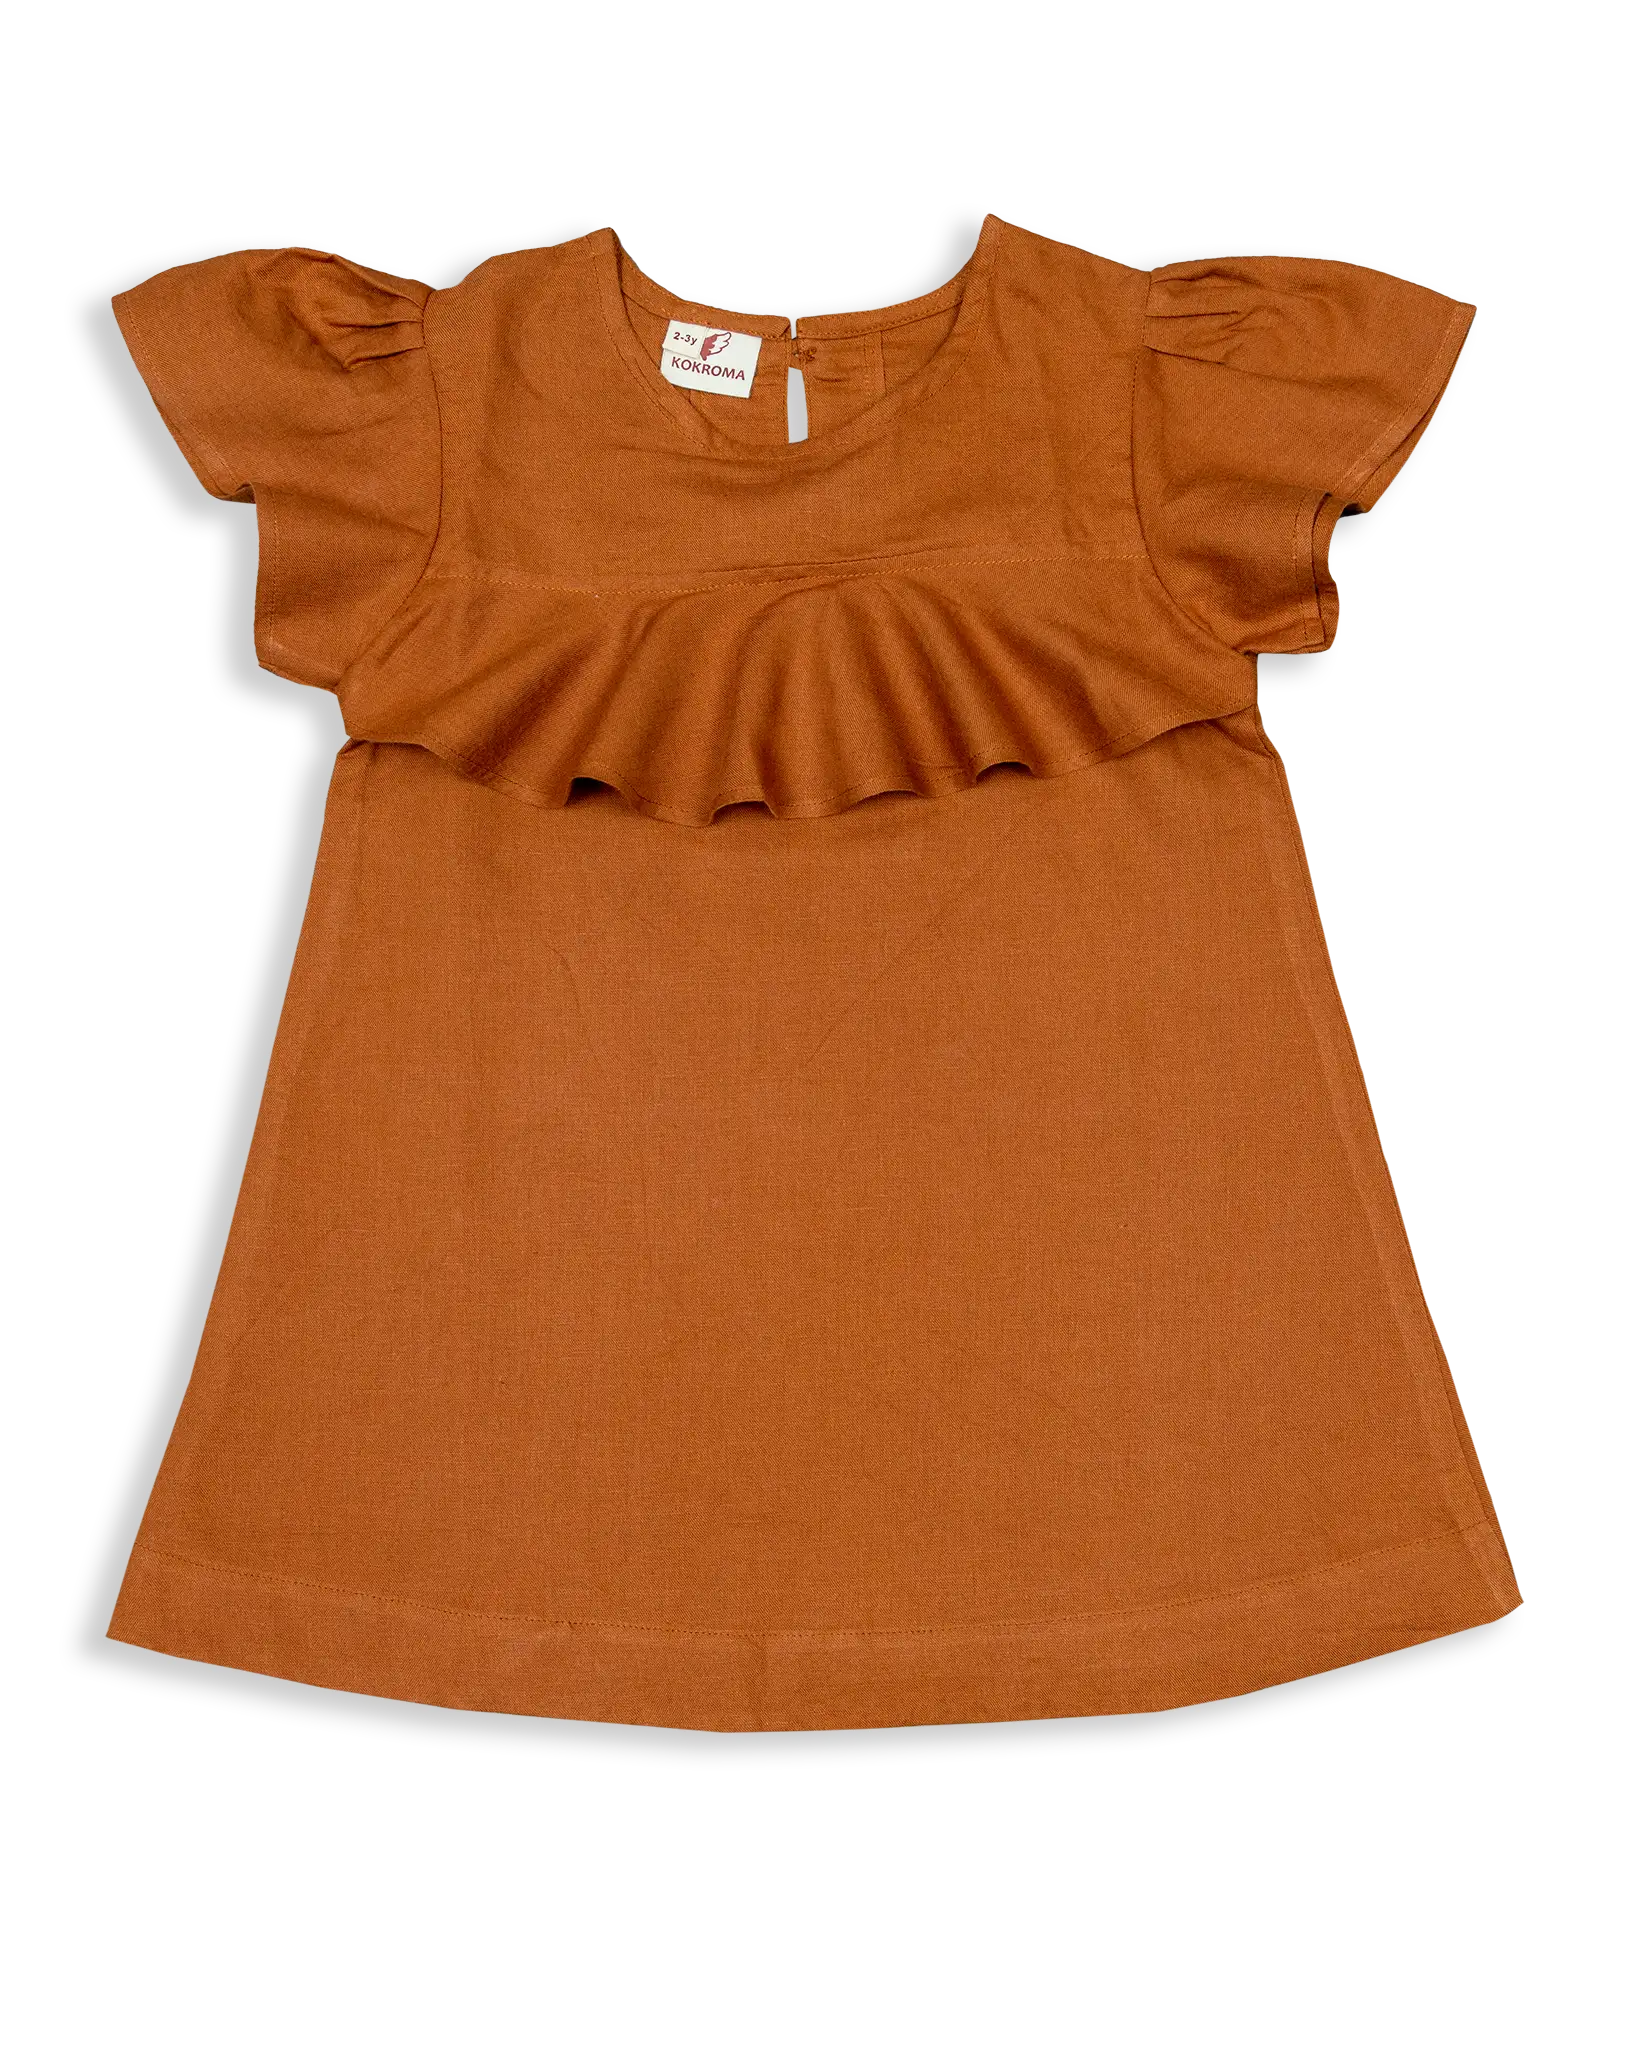 Let your kids look their best this summer with Linen Kids Dress! Made of 100% pure and breathable linen, these light-weight dresses will keep them cool and comfortable while they shine in the sun. Perfect for any occasion, each dress is handmade with love in Nepal.